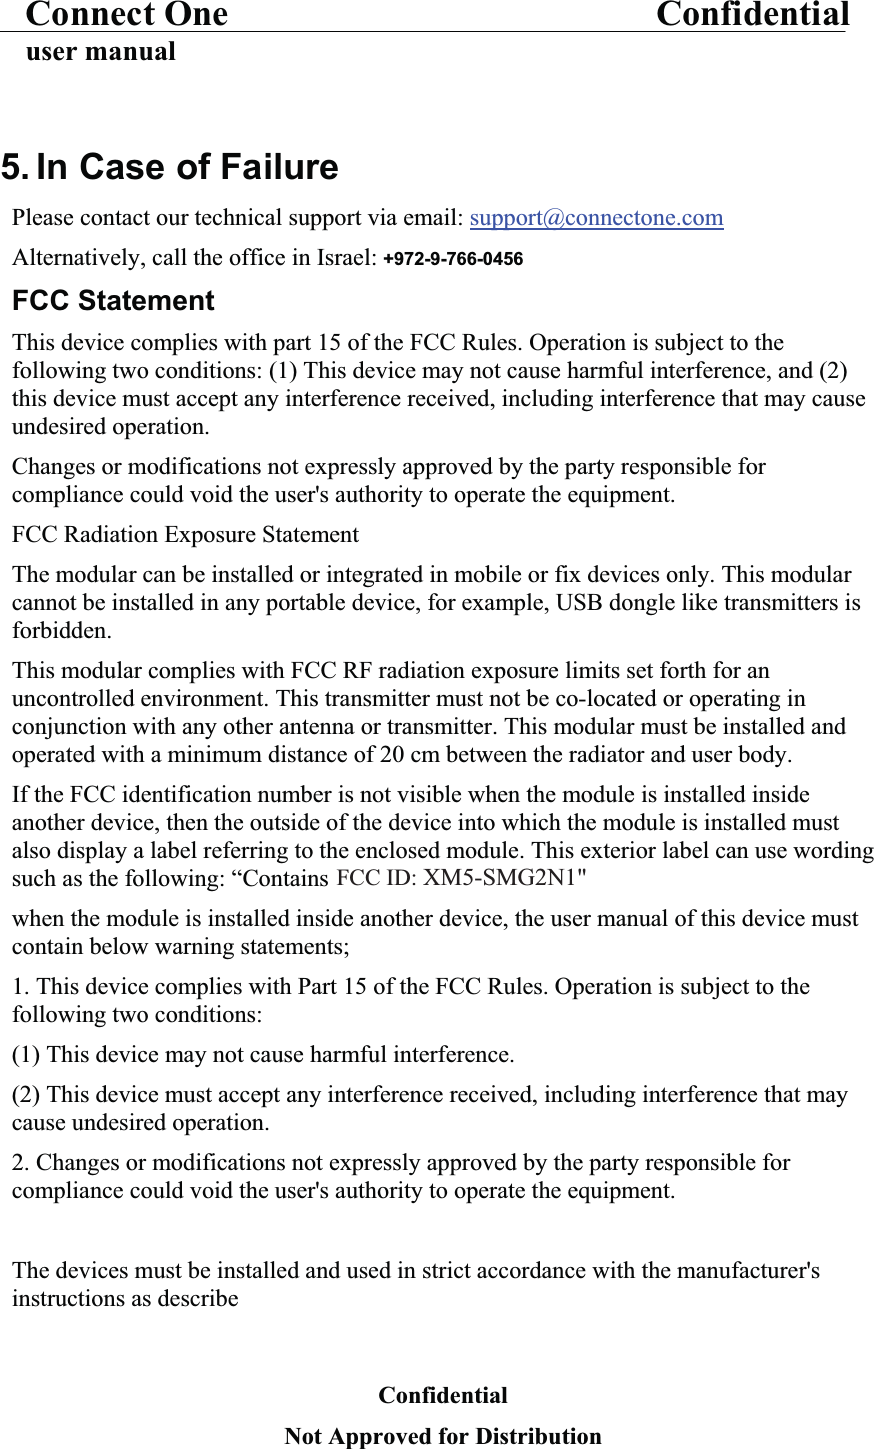 Connect One Confidentialuser manual5. In Case of FailurePlease contact our technical support via email: support@connectone.comAlternatively, call the office in Israel: +972-9-766-0456FCC StatementThis device complies with part 15 of the FCC Rules. Operation is subject to the following two conditions: (1) This device may not cause harmful interference, and (2) this device must accept any interference received, including interference that may cause undesired operation.Changes or modifications not expressly approved by the party responsible for compliance could void the user&apos;s authority to operate the equipment.FCC Radiation Exposure StatementThe modular can be installed or integrated in mobile or fix devices only. This modular cannot be installed in any portable device, for example, USB dongle like transmitters is forbidden.This modular complies with FCC RF radiation exposure limits set forth for an uncontrolled environment. This transmitter must not be co-located or operating in conjunction with any other antenna or transmitter. This modular must be installed and operated with a minimum distance of 20 cm between the radiator and user body.If the FCC identification number is not visible when the module is installed inside another device, then the outside of the device into which the module is installed must also display a label referring to the enclosed module. This exterior label can use wording such as the following: “Contains Transmitter Module FCC ID:  when the module is installed inside another device, the user manual of this device must contain below warning statements;1. This device complies with Part 15 of the FCC Rules. Operation is subject to the following two conditions:(1) This device may not cause harmful interference.(2) This device must accept any interference received, including interference that may cause undesired operation.2. Changes or modifications not expressly approved by the party responsible for compliance could void the user&apos;s authority to operate the equipment.The devices must be installed and used in strict accordance with the manufacturer&apos;s instructions as describeConfidentialNot Approved for DistributionFCC ID: XM5-SMG2N1&quot;